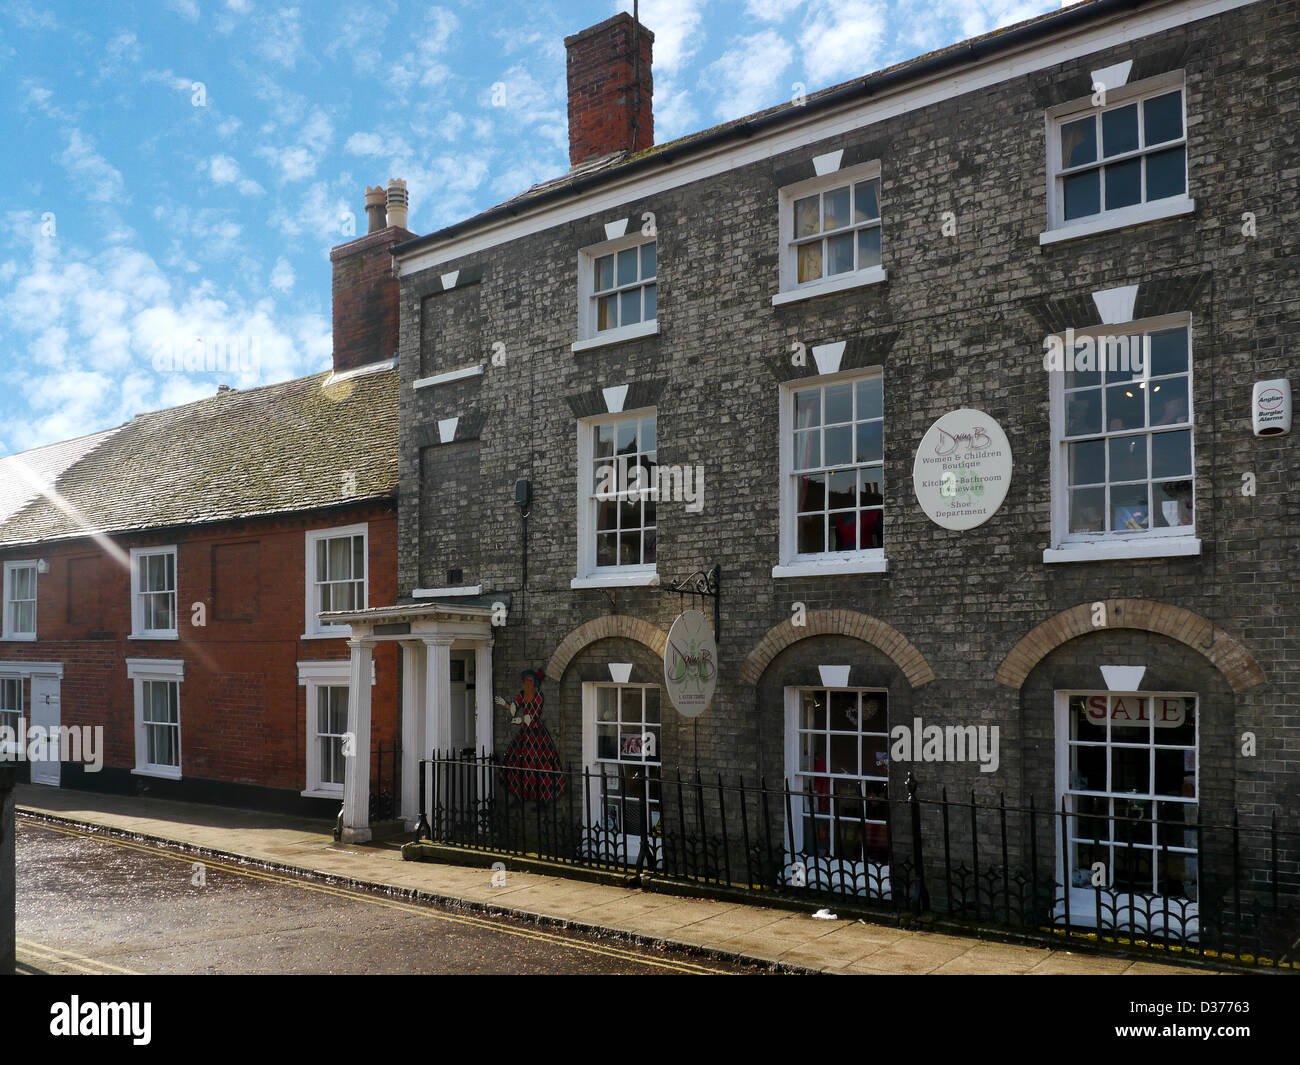 A row of  Georgian style houses in the market town of Framlingham Suffolk, UK Stock Photo